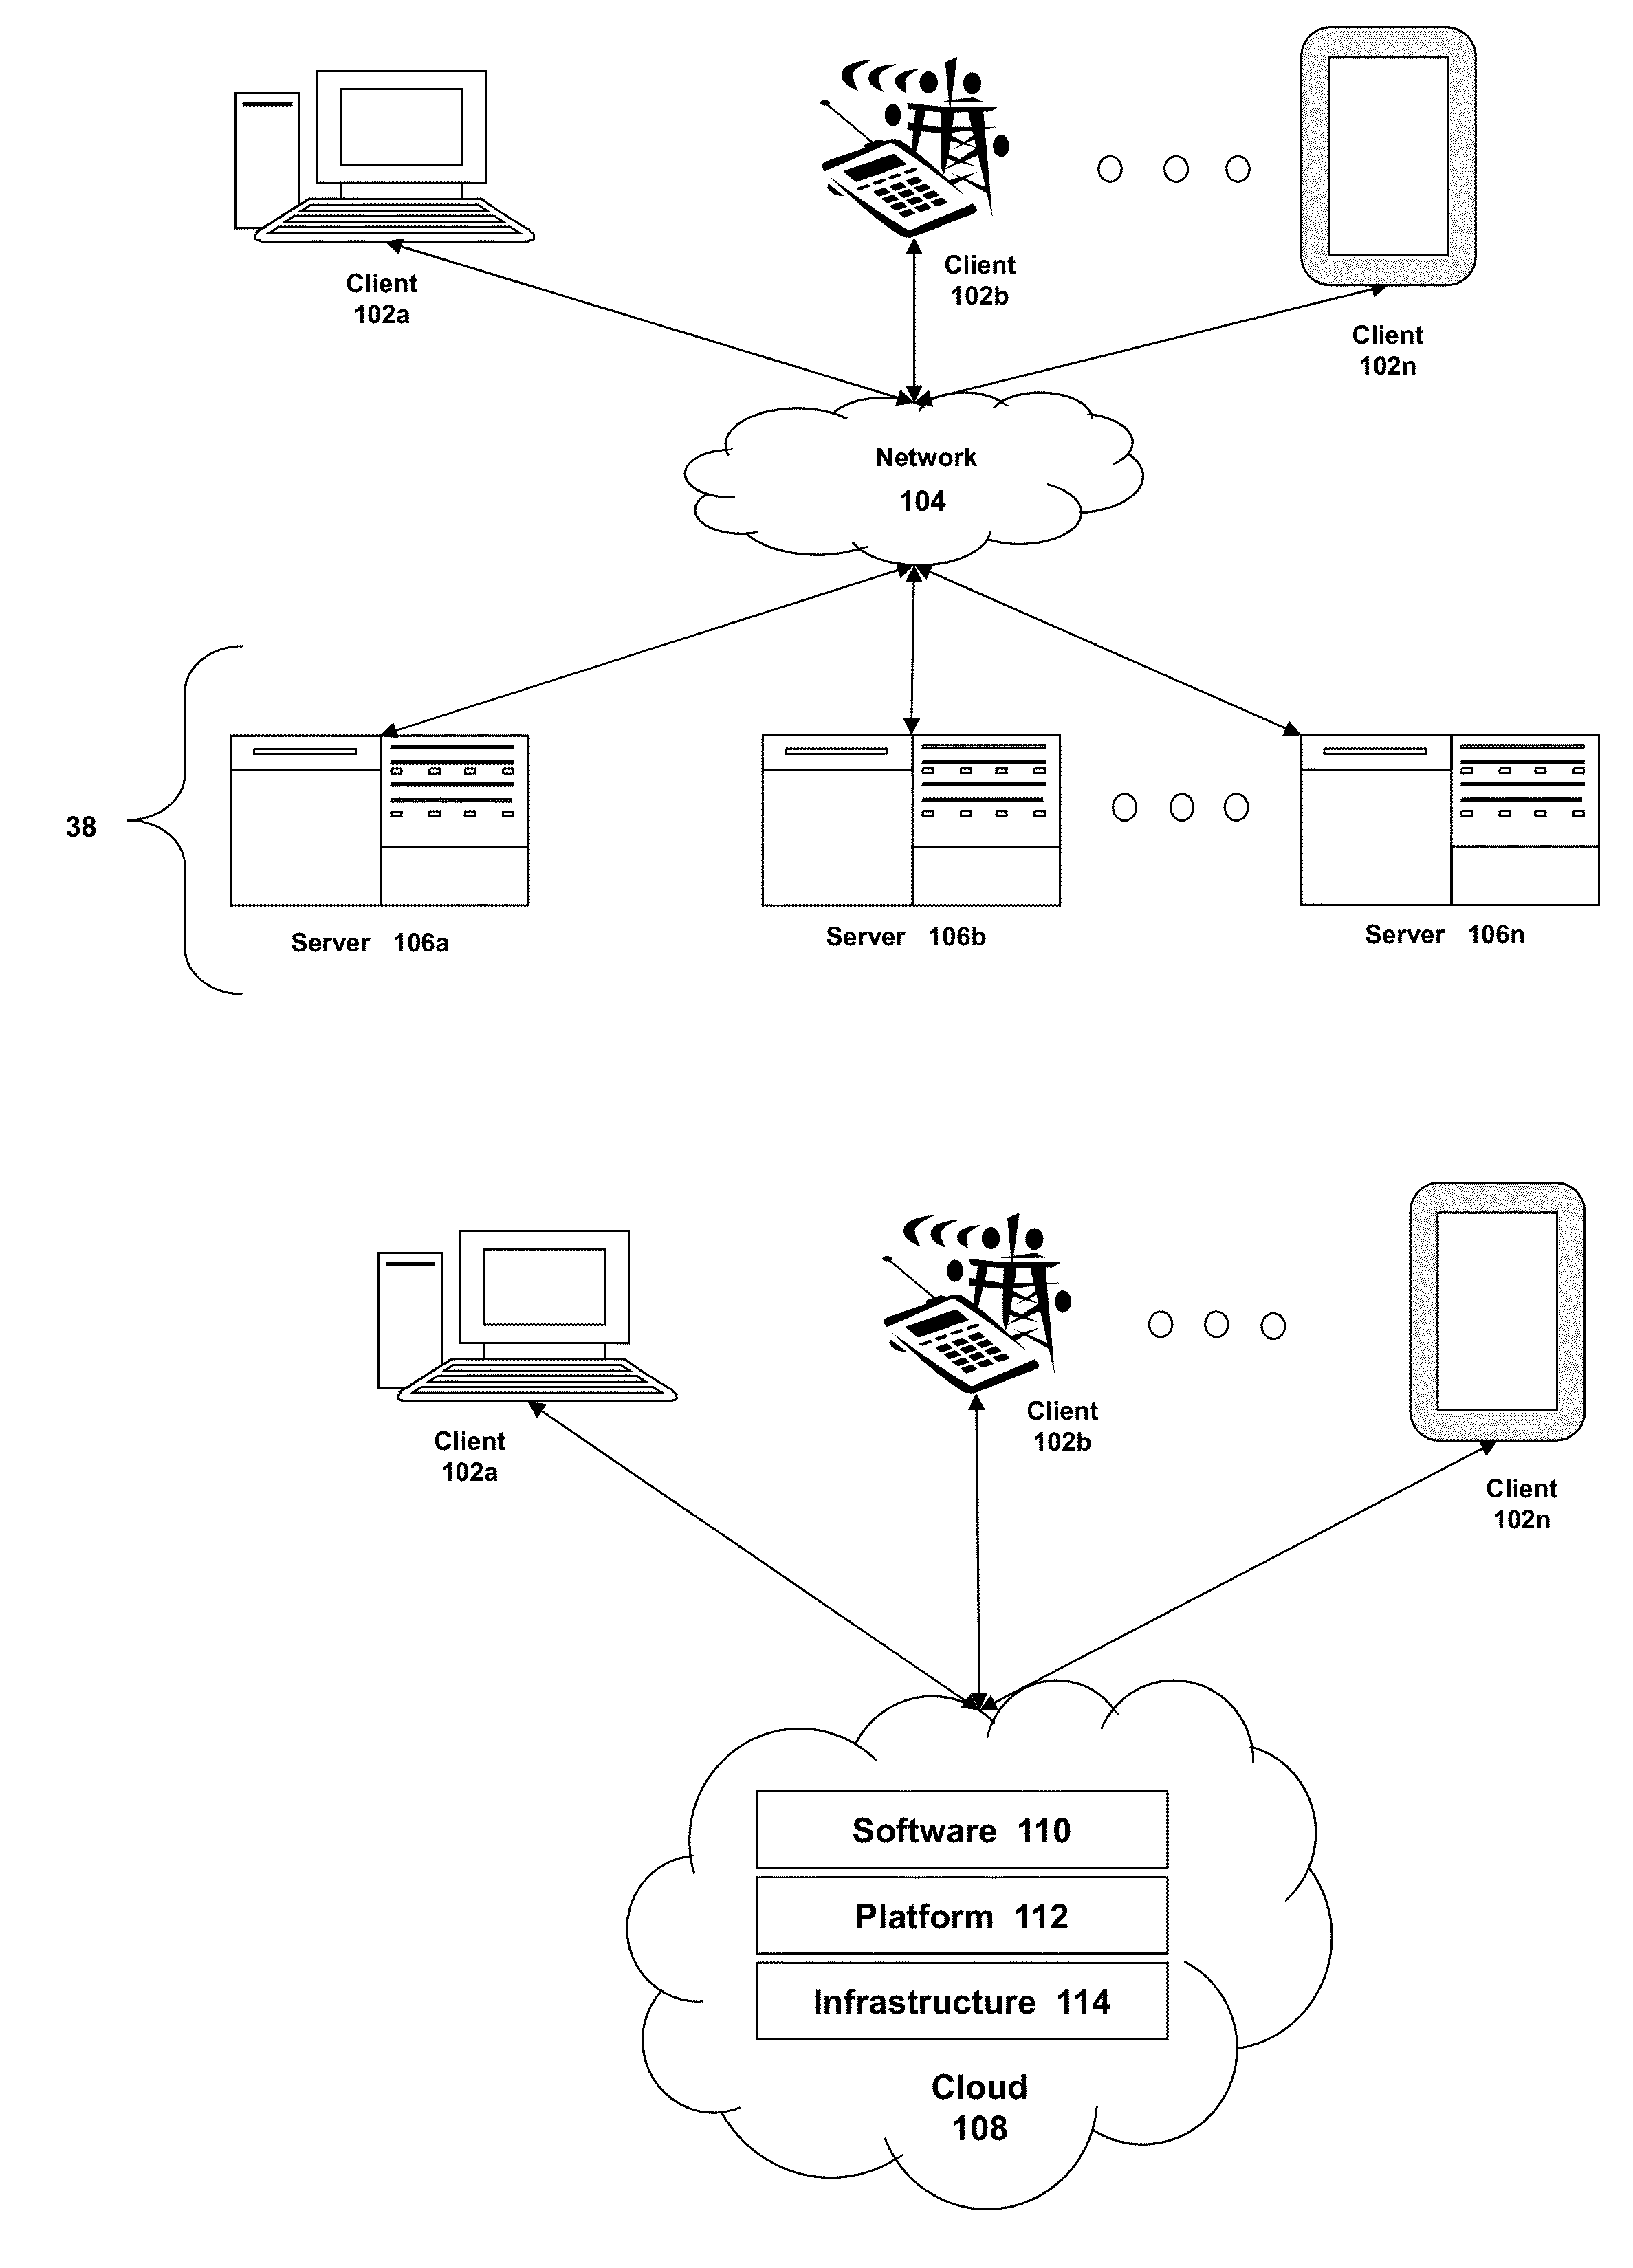 System and method for identifying infected networks and systems from unknown attacks